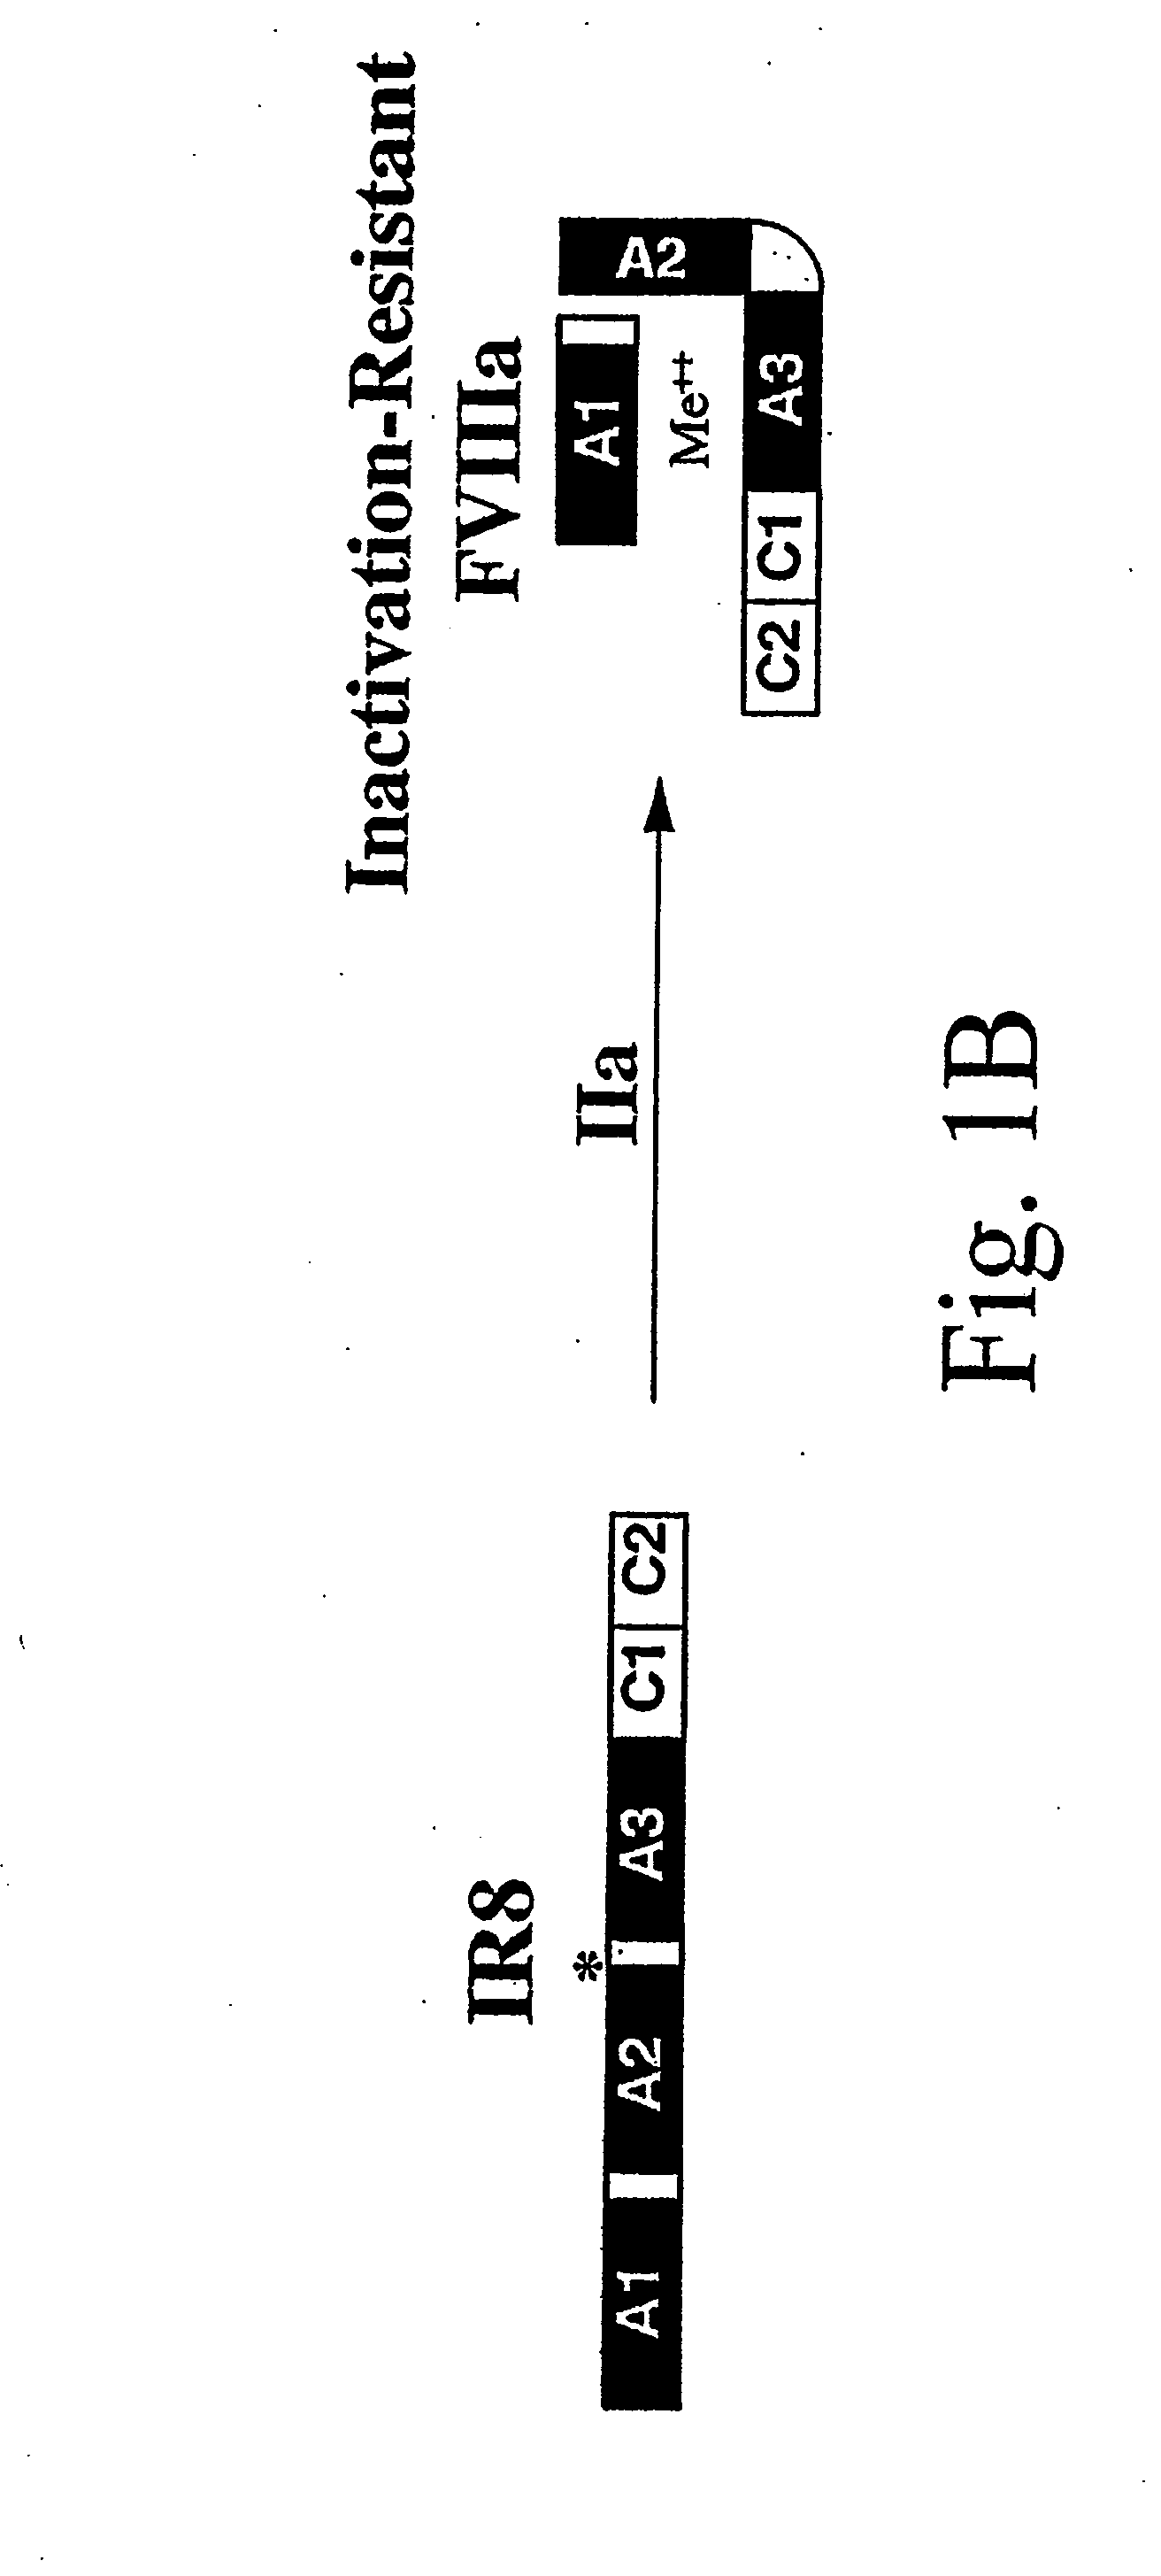 Method of Producing Factor VIII Proteins by Recombinant Methods